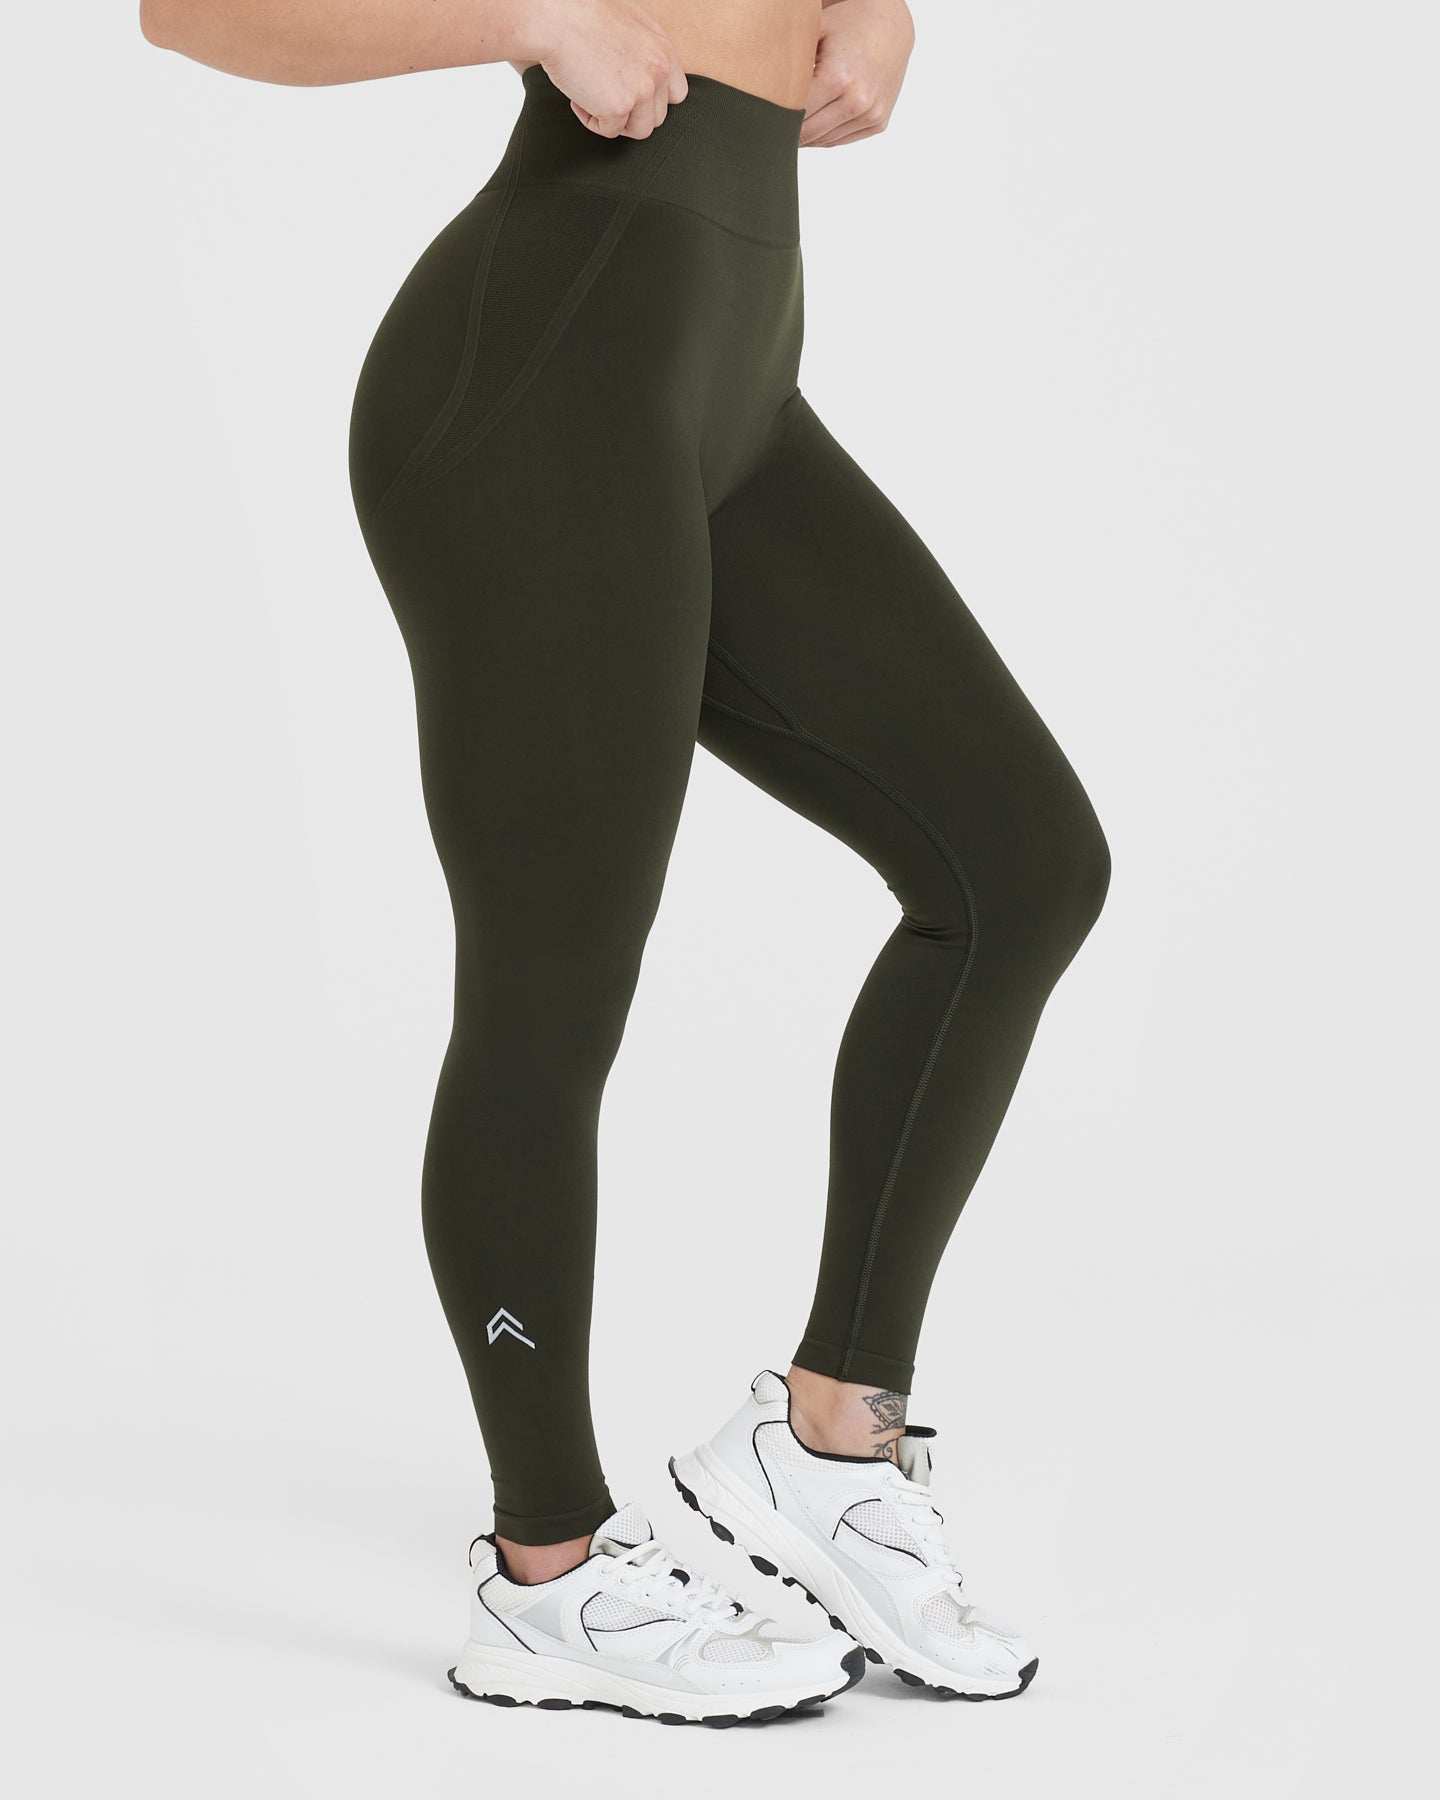 Consistency Seamless 3/4 Length Leggings With Shaping Detail in Washed Khaki